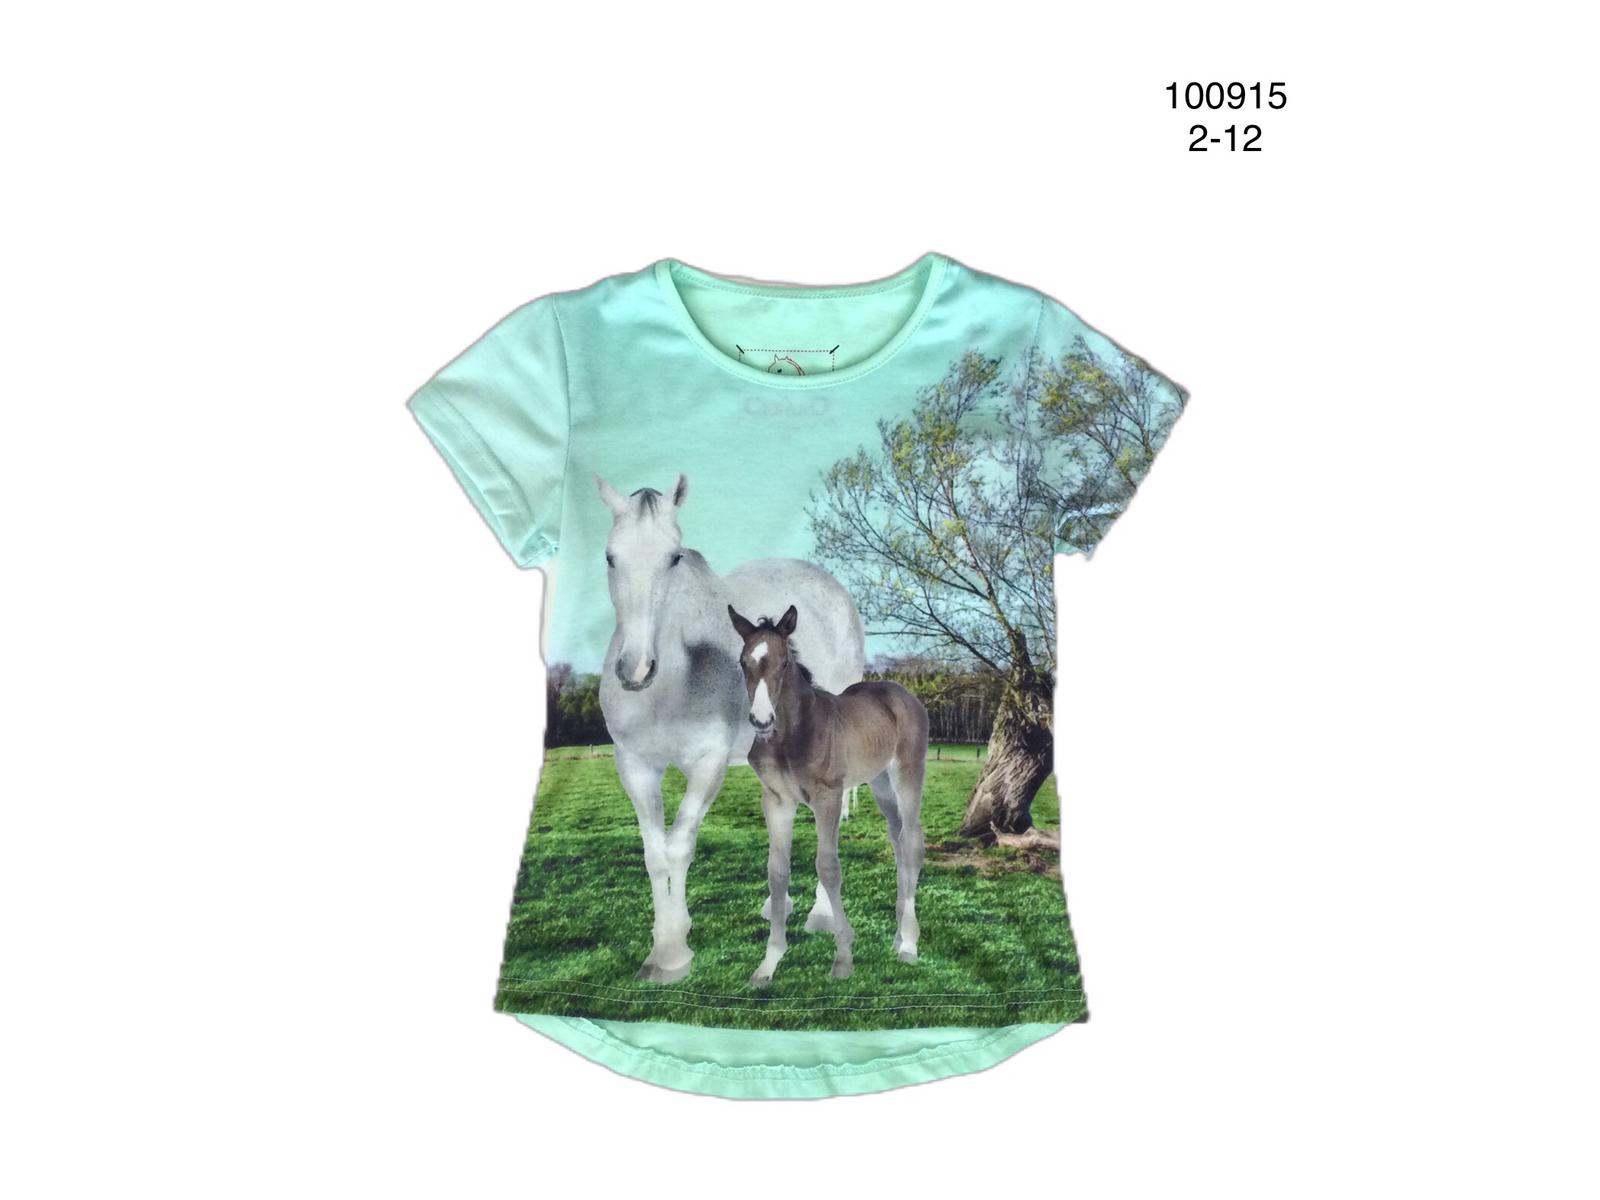 Green shirt with horse and foal